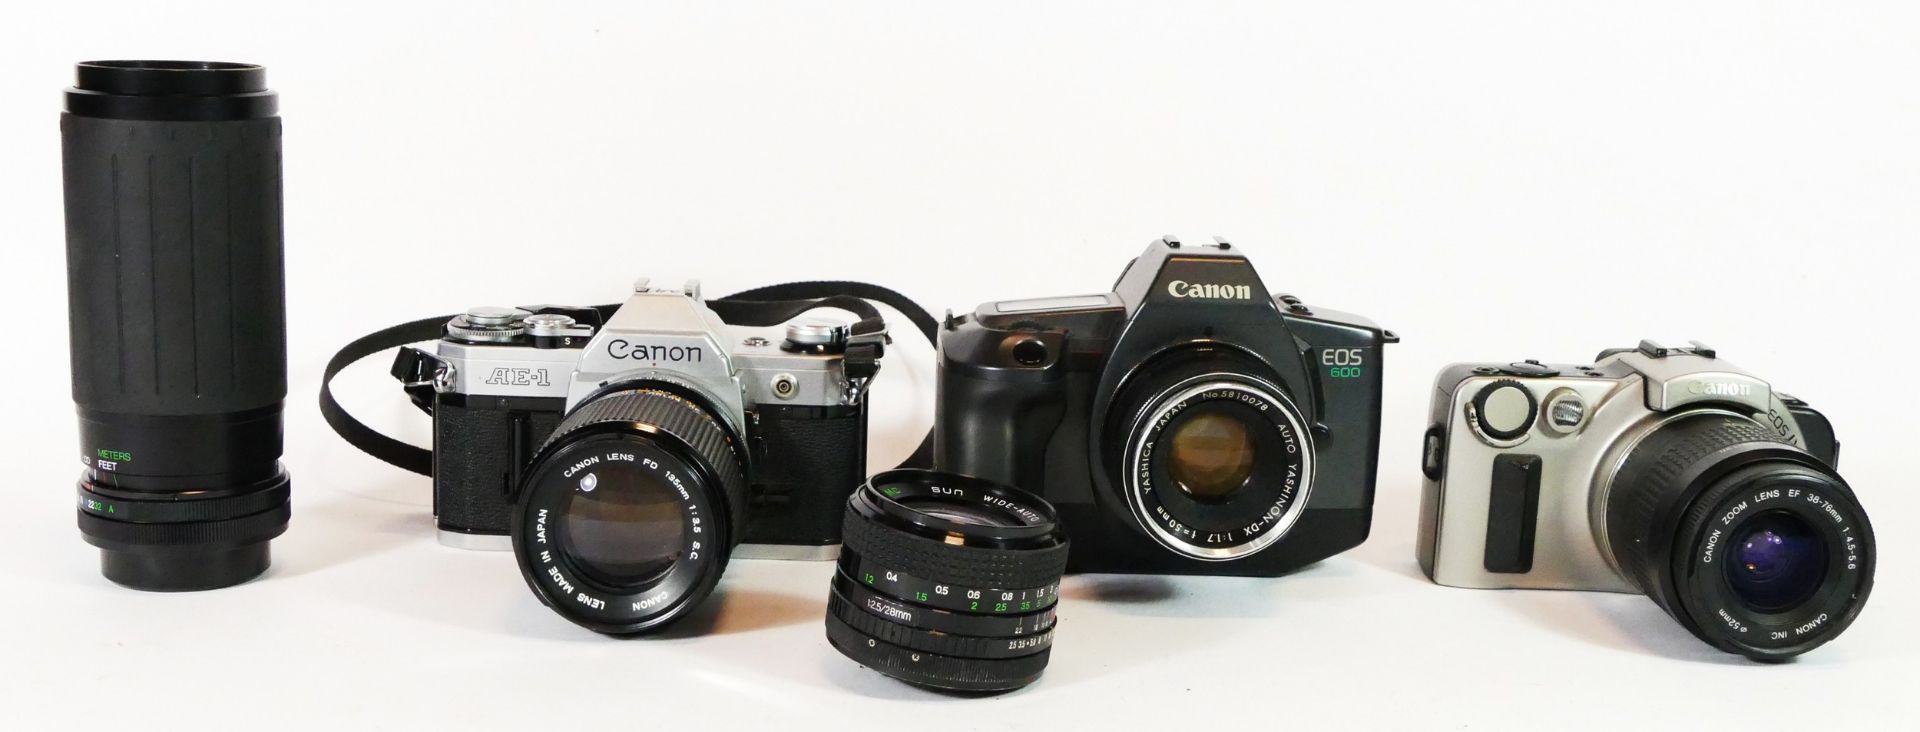 Three Canon cameras, to include a AE-1, a EOS600 and a EOs IX, with lens, together with two